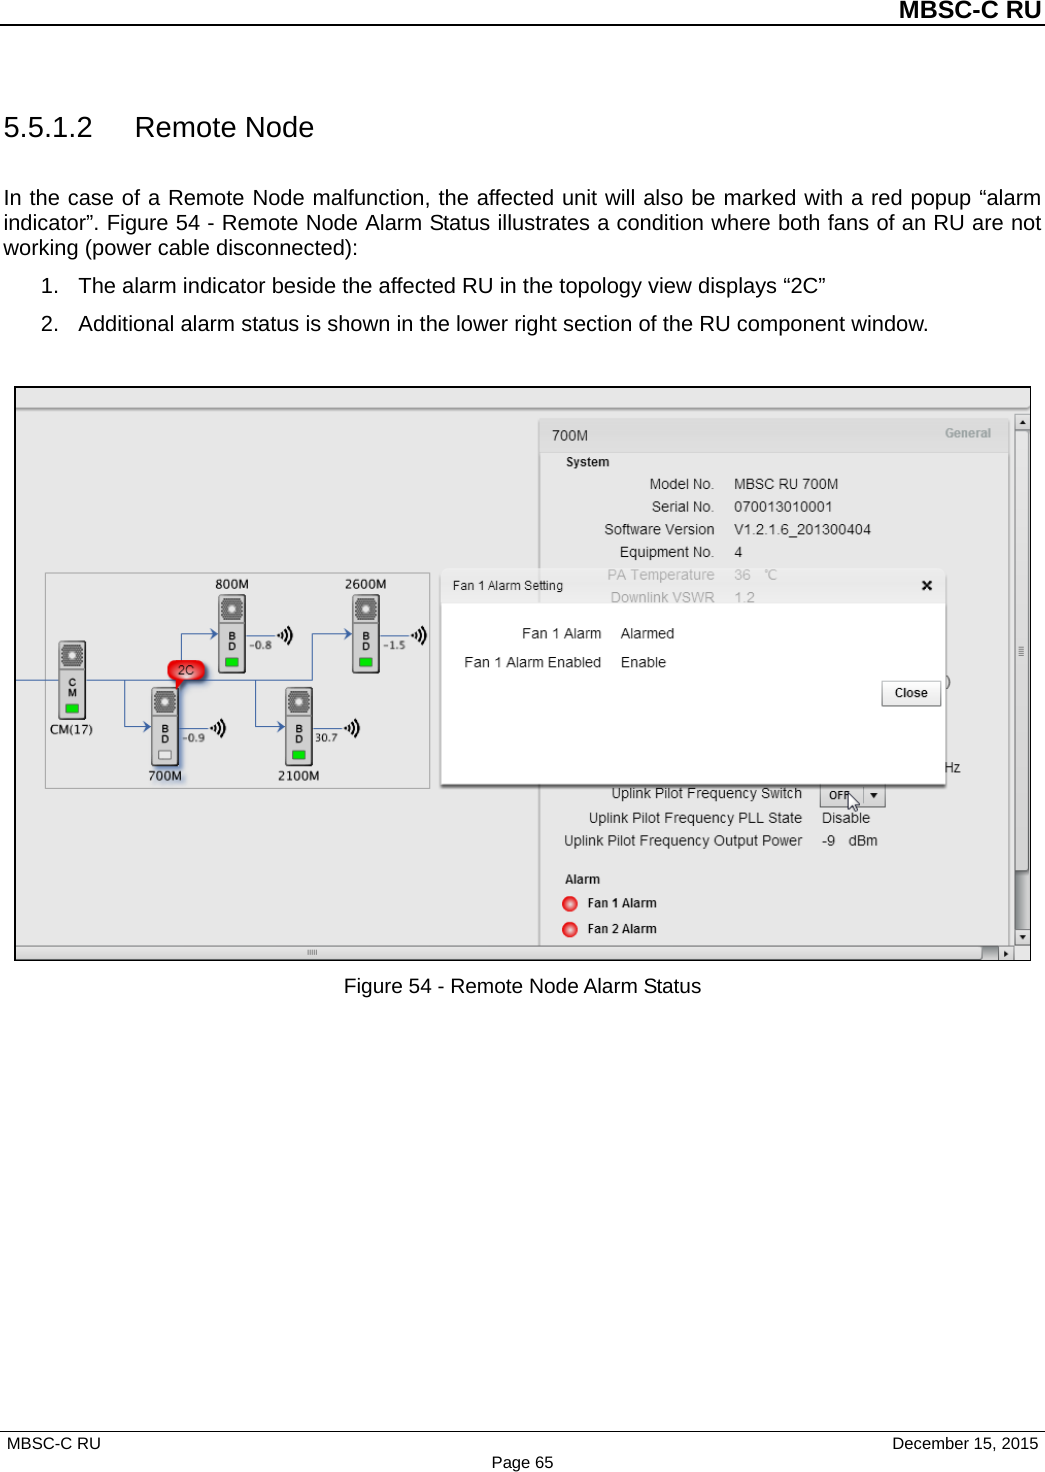          MBSC-C RU   MBSC-C RU                                     December 15, 2015 Page 65 5.5.1.2 Remote Node In the case of a Remote Node malfunction, the affected unit will also be marked with a red popup “alarm indicator”. Figure 54 - Remote Node Alarm Status illustrates a condition where both fans of an RU are not working (power cable disconnected): 1. The alarm indicator beside the affected RU in the topology view displays “2C”   2. Additional alarm status is shown in the lower right section of the RU component window.     Figure 54 - Remote Node Alarm Status 